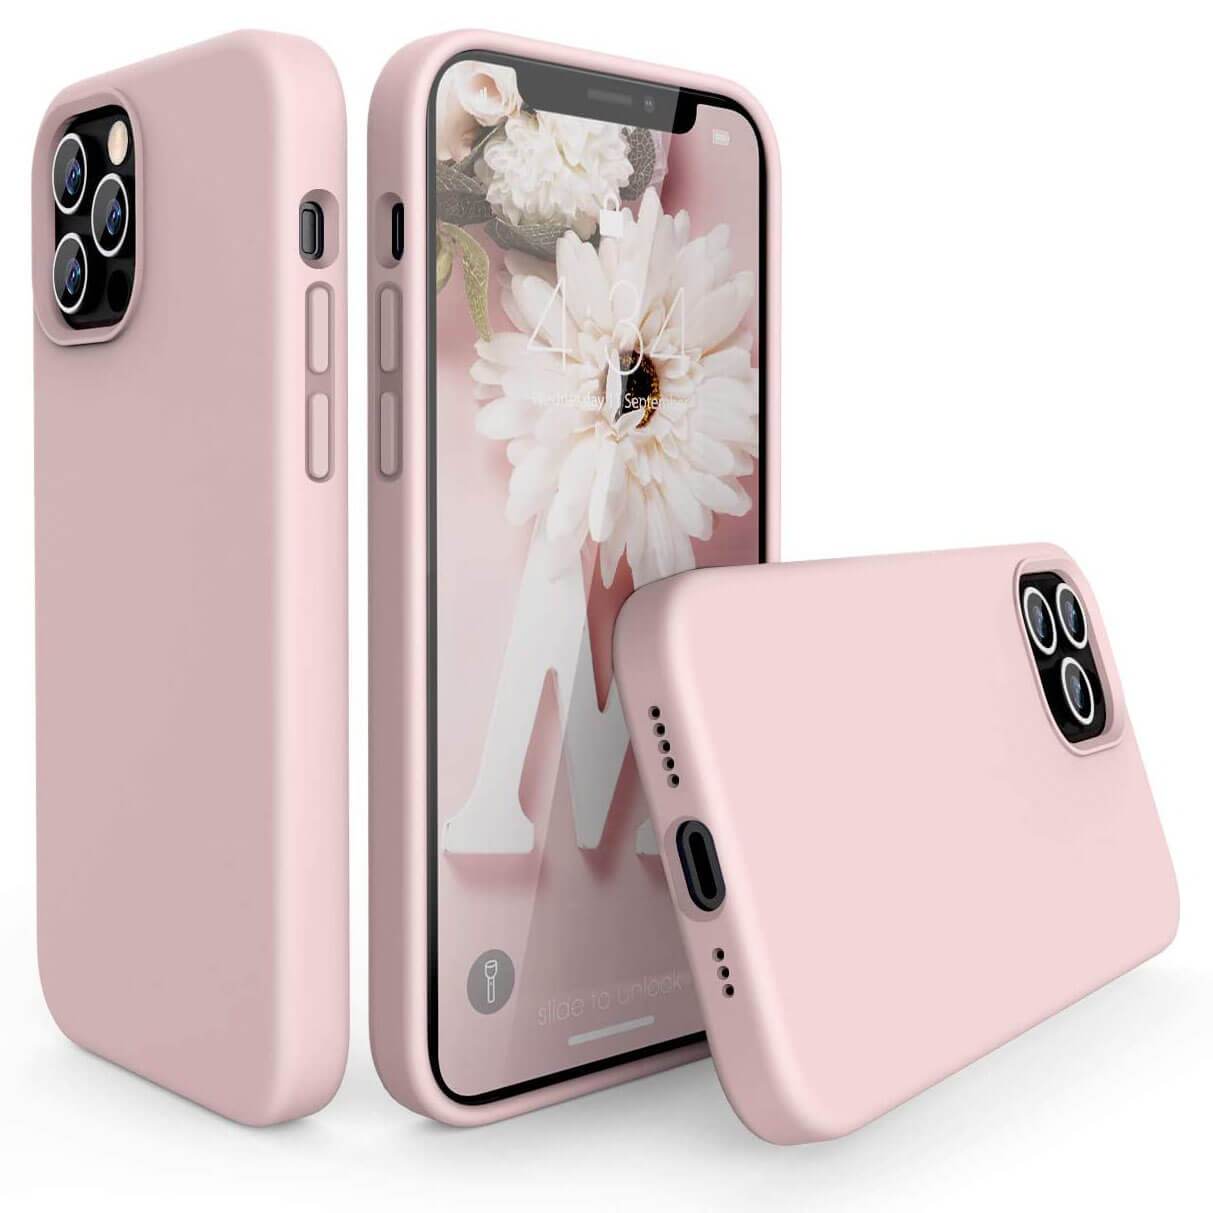 Liquid Silicone Case For Apple iPhone 12 / 12 Pro Luxury Thin Phone Cover Pink Sand